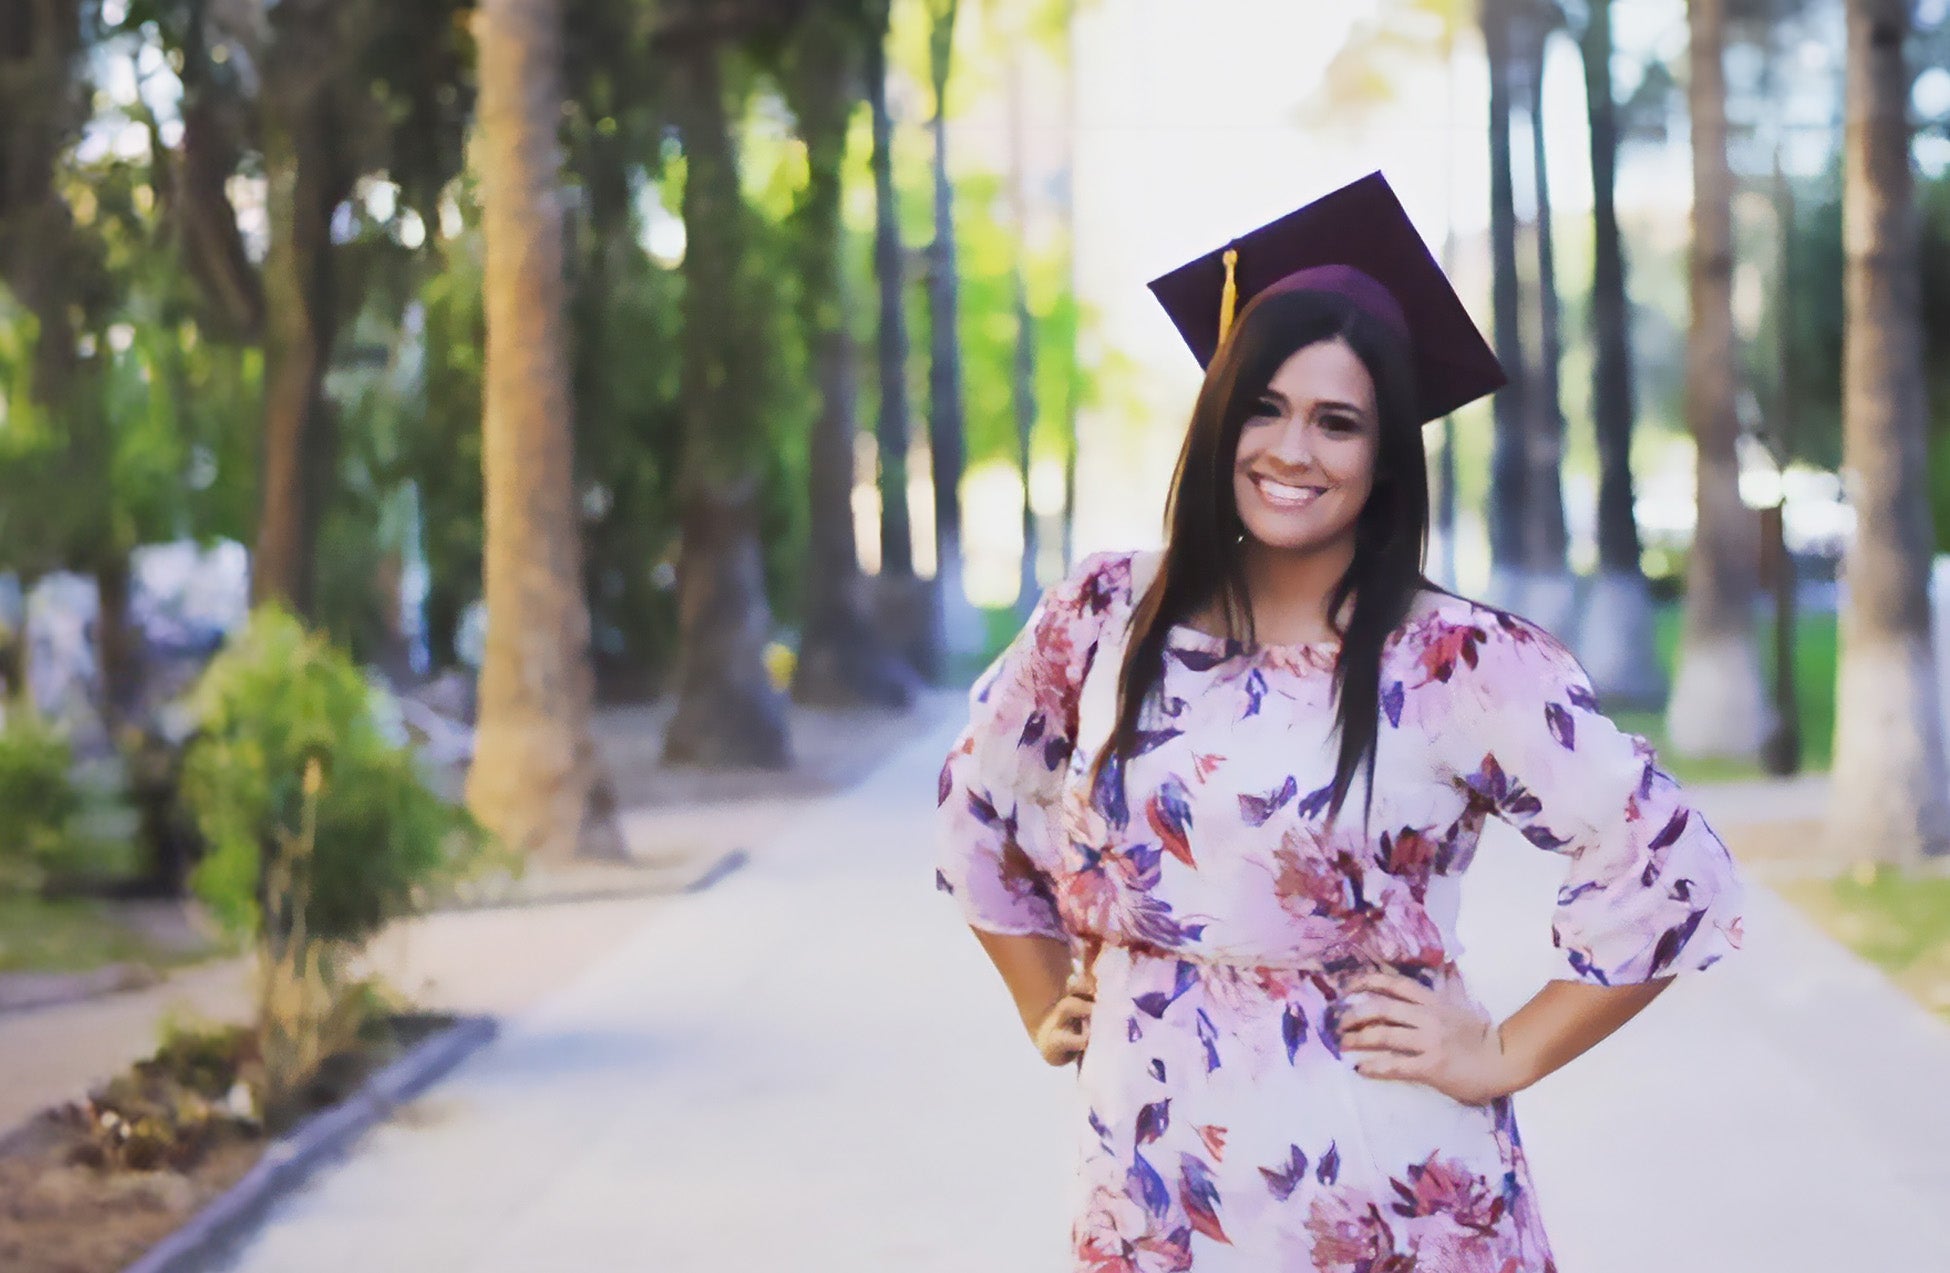 Jennifer Key wearing a graduation cap standing on a paved path with trees in the background